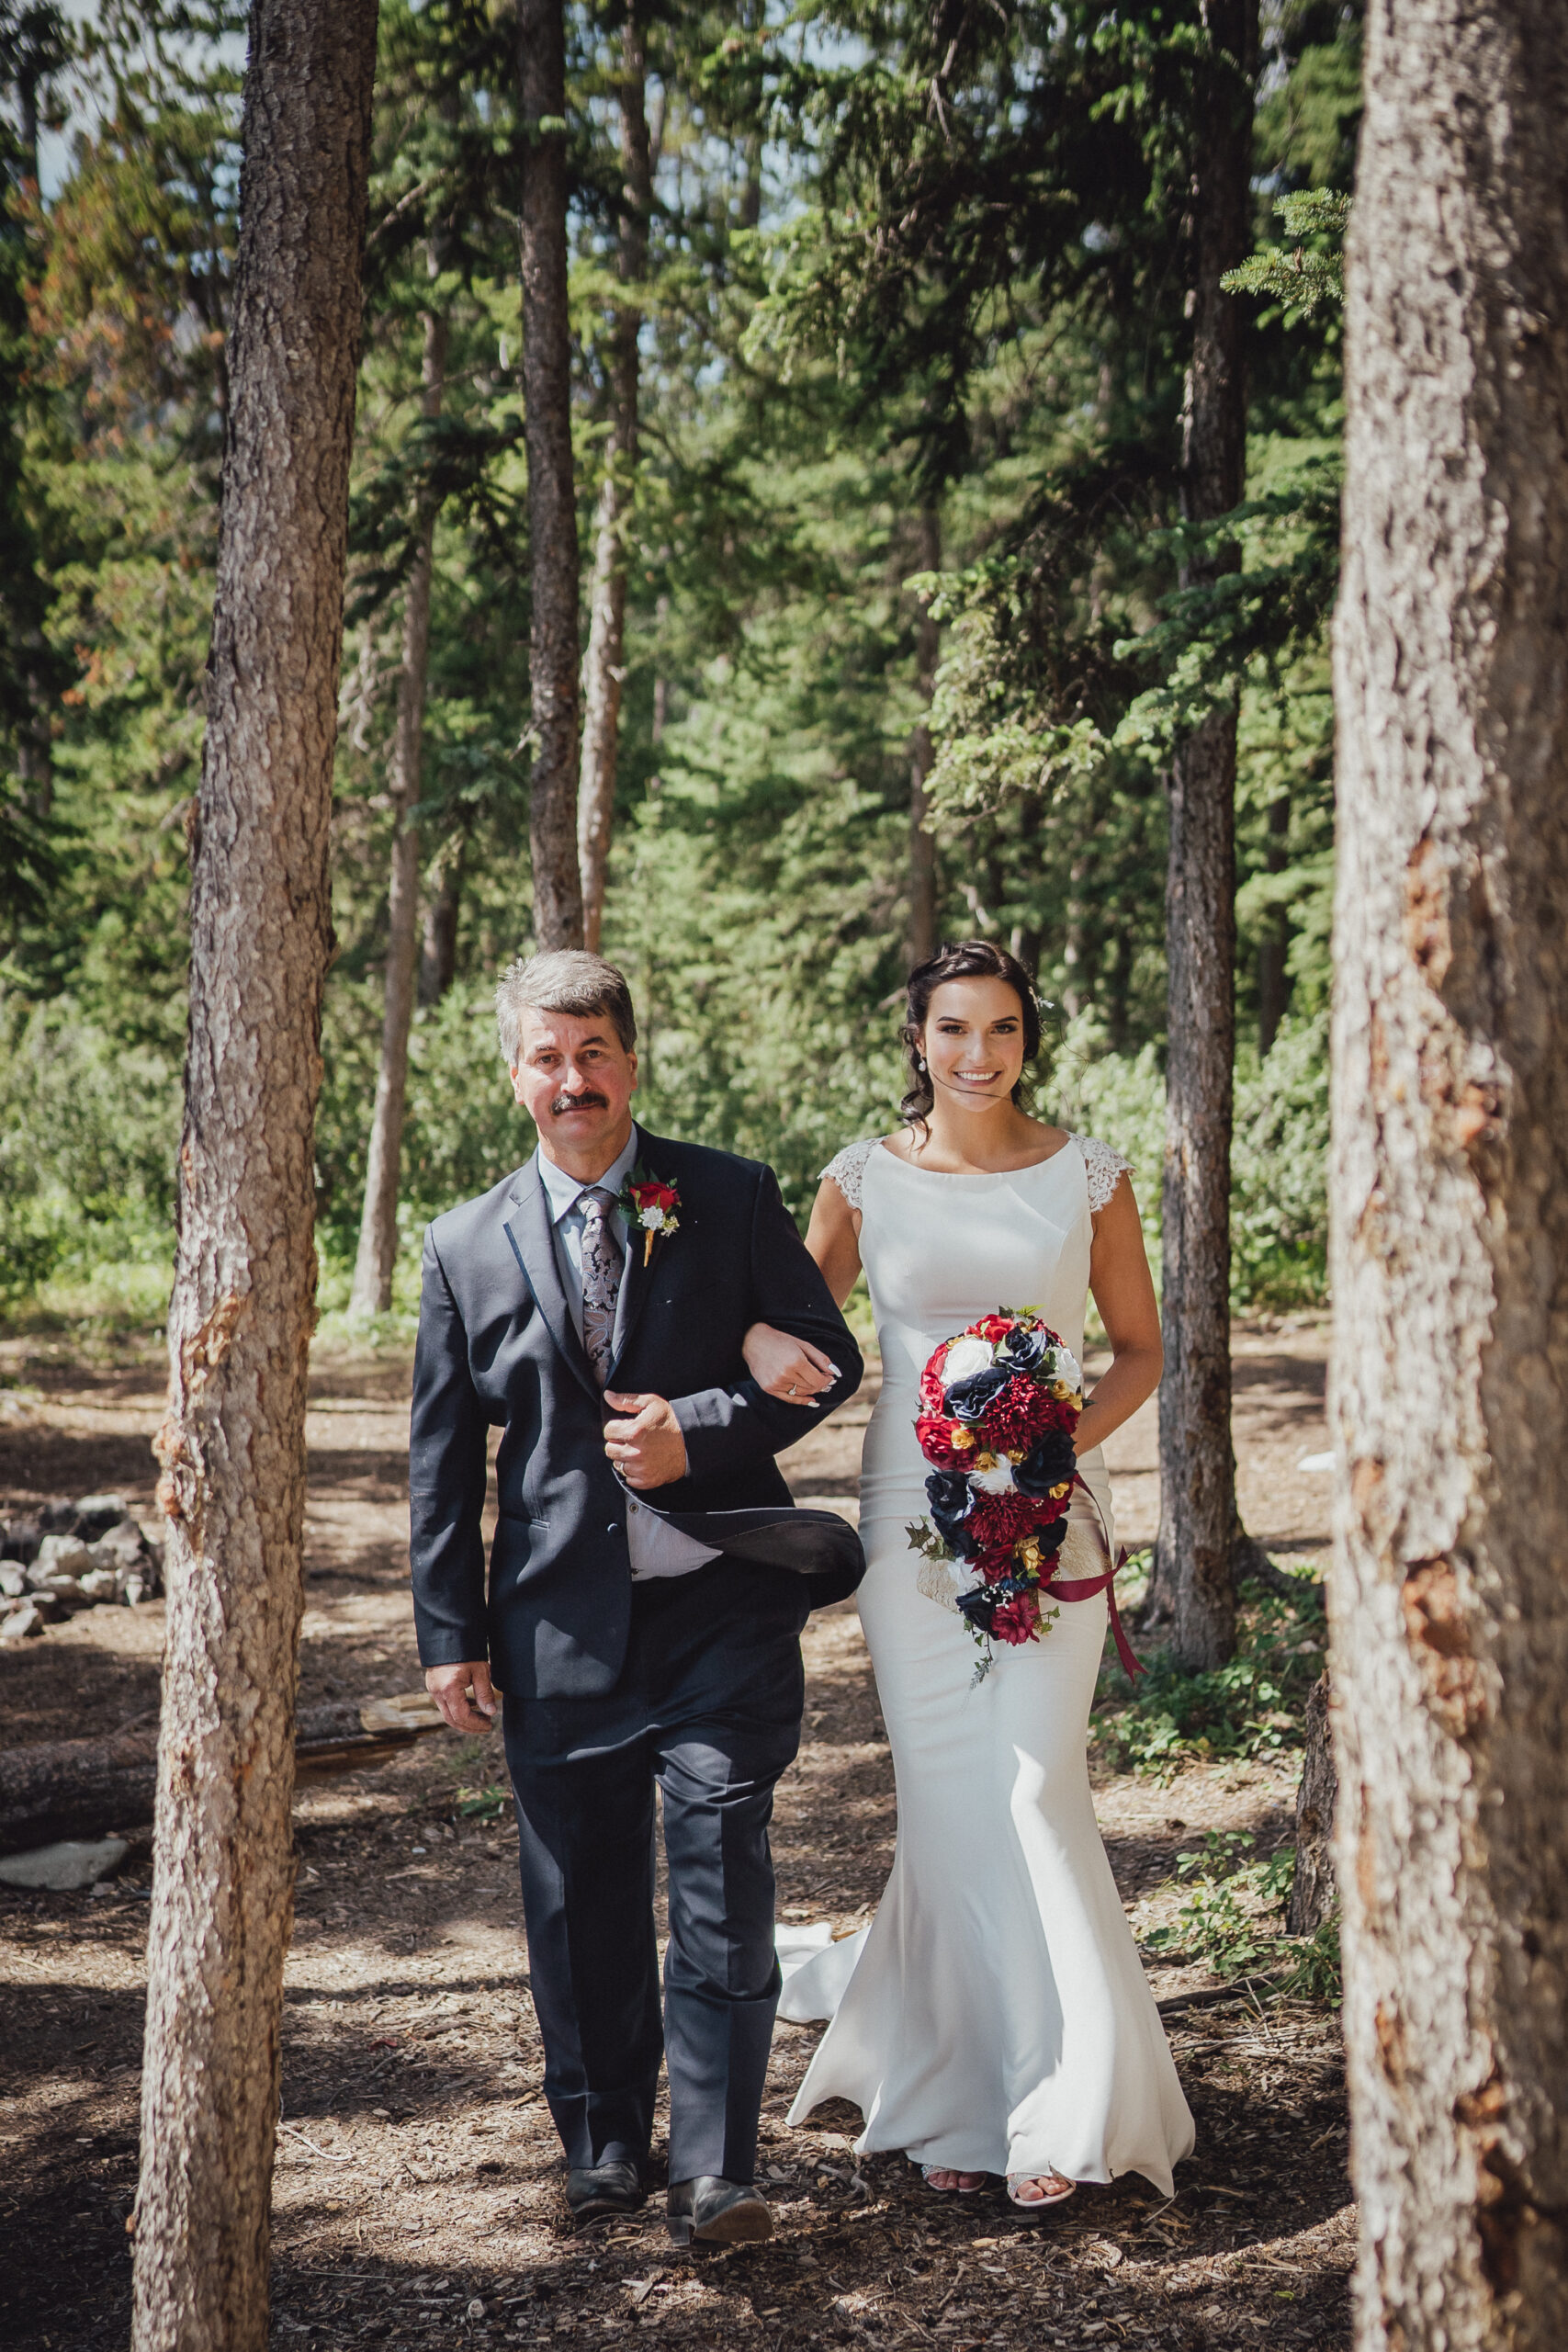 Classic bride in high neck wedding gown walking down the aisle through the woods, with her father